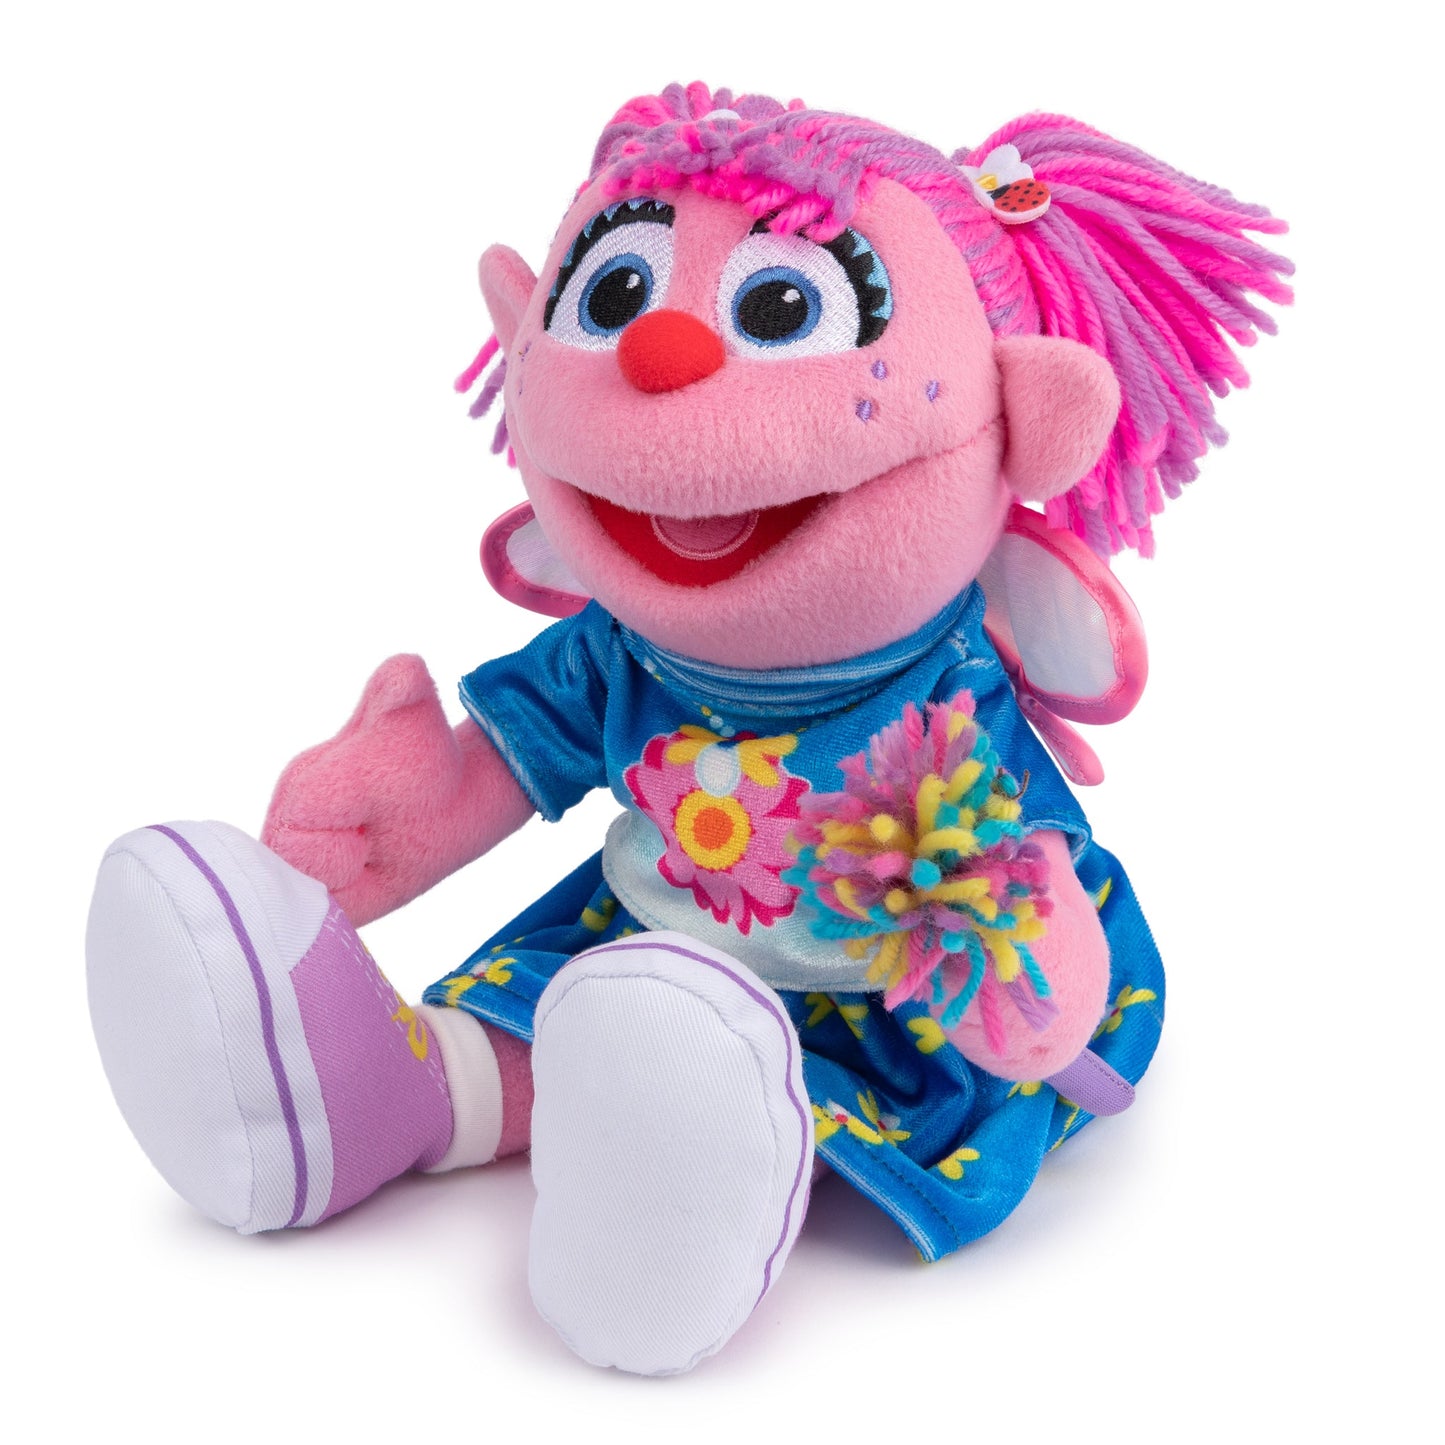 ABBY CADABBY WITH WAND, 11 IN